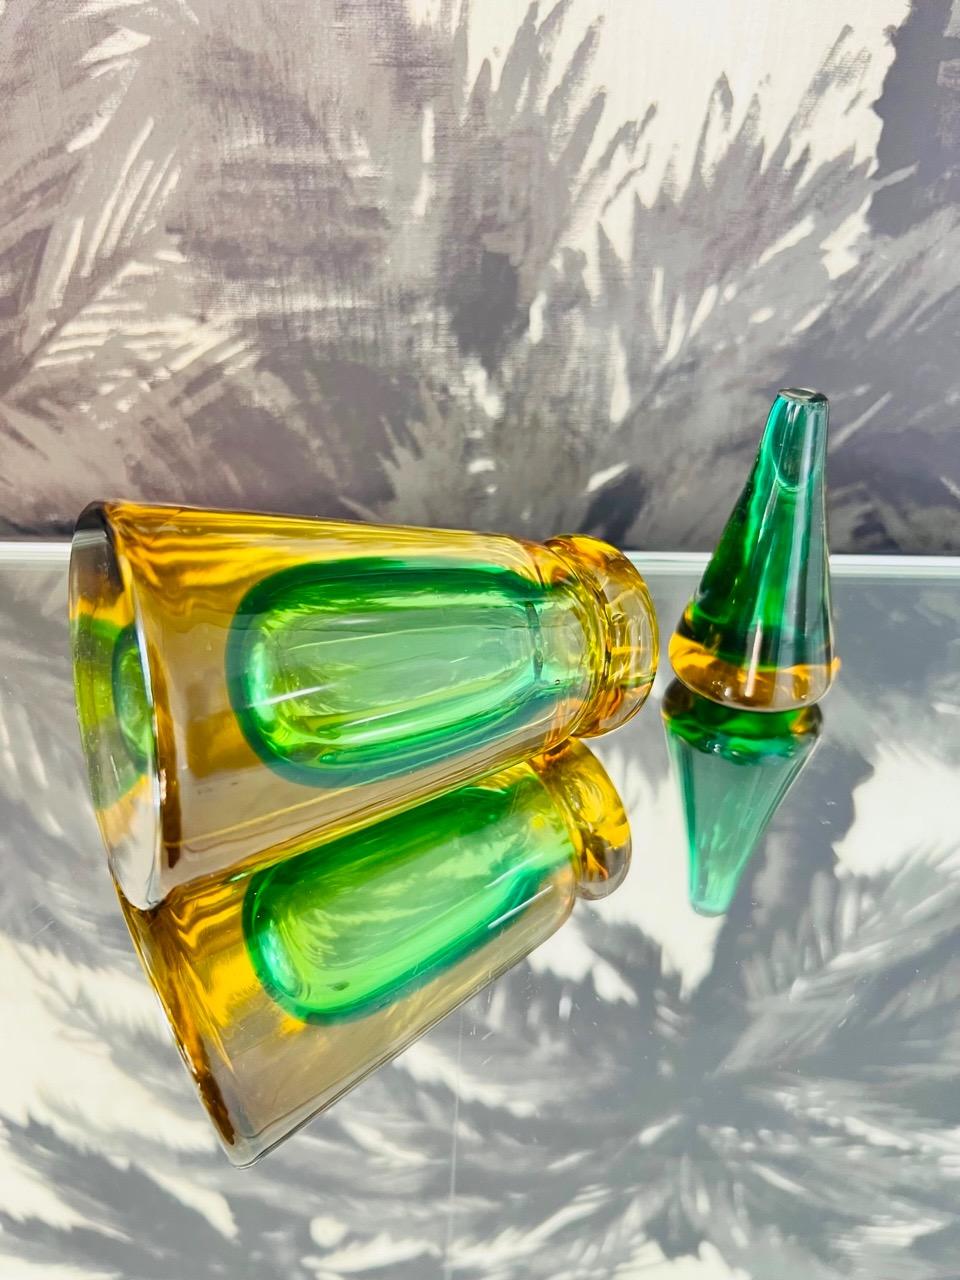 Mid-20th Century Green and Yellow Murano Glass Bottle Designed by Flavio Poli, c. 1960